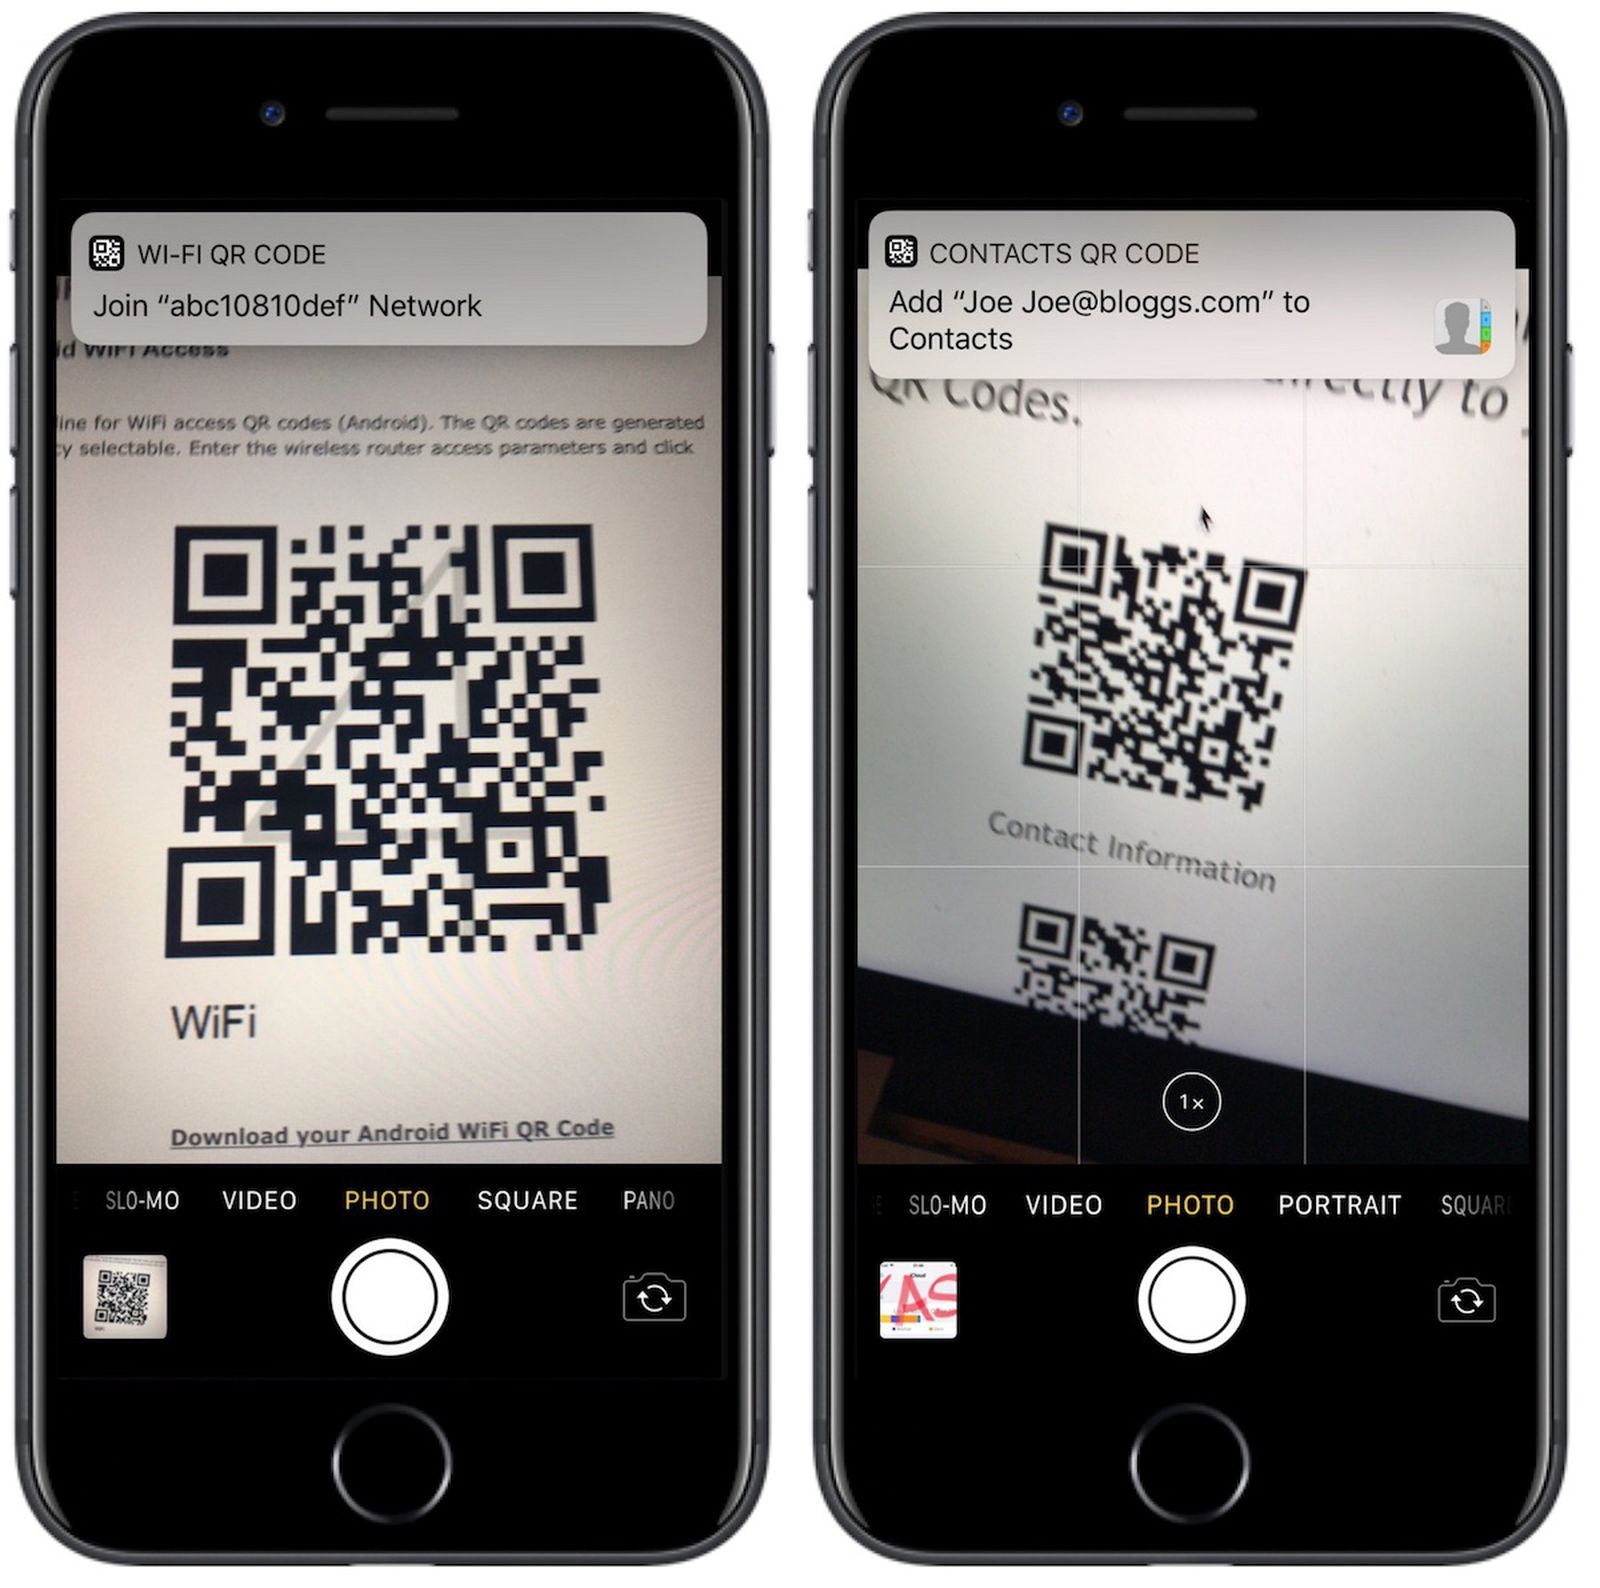 Iphone Can Scan Qr Codes Directly In Camera App On Ios 11 Macrumors